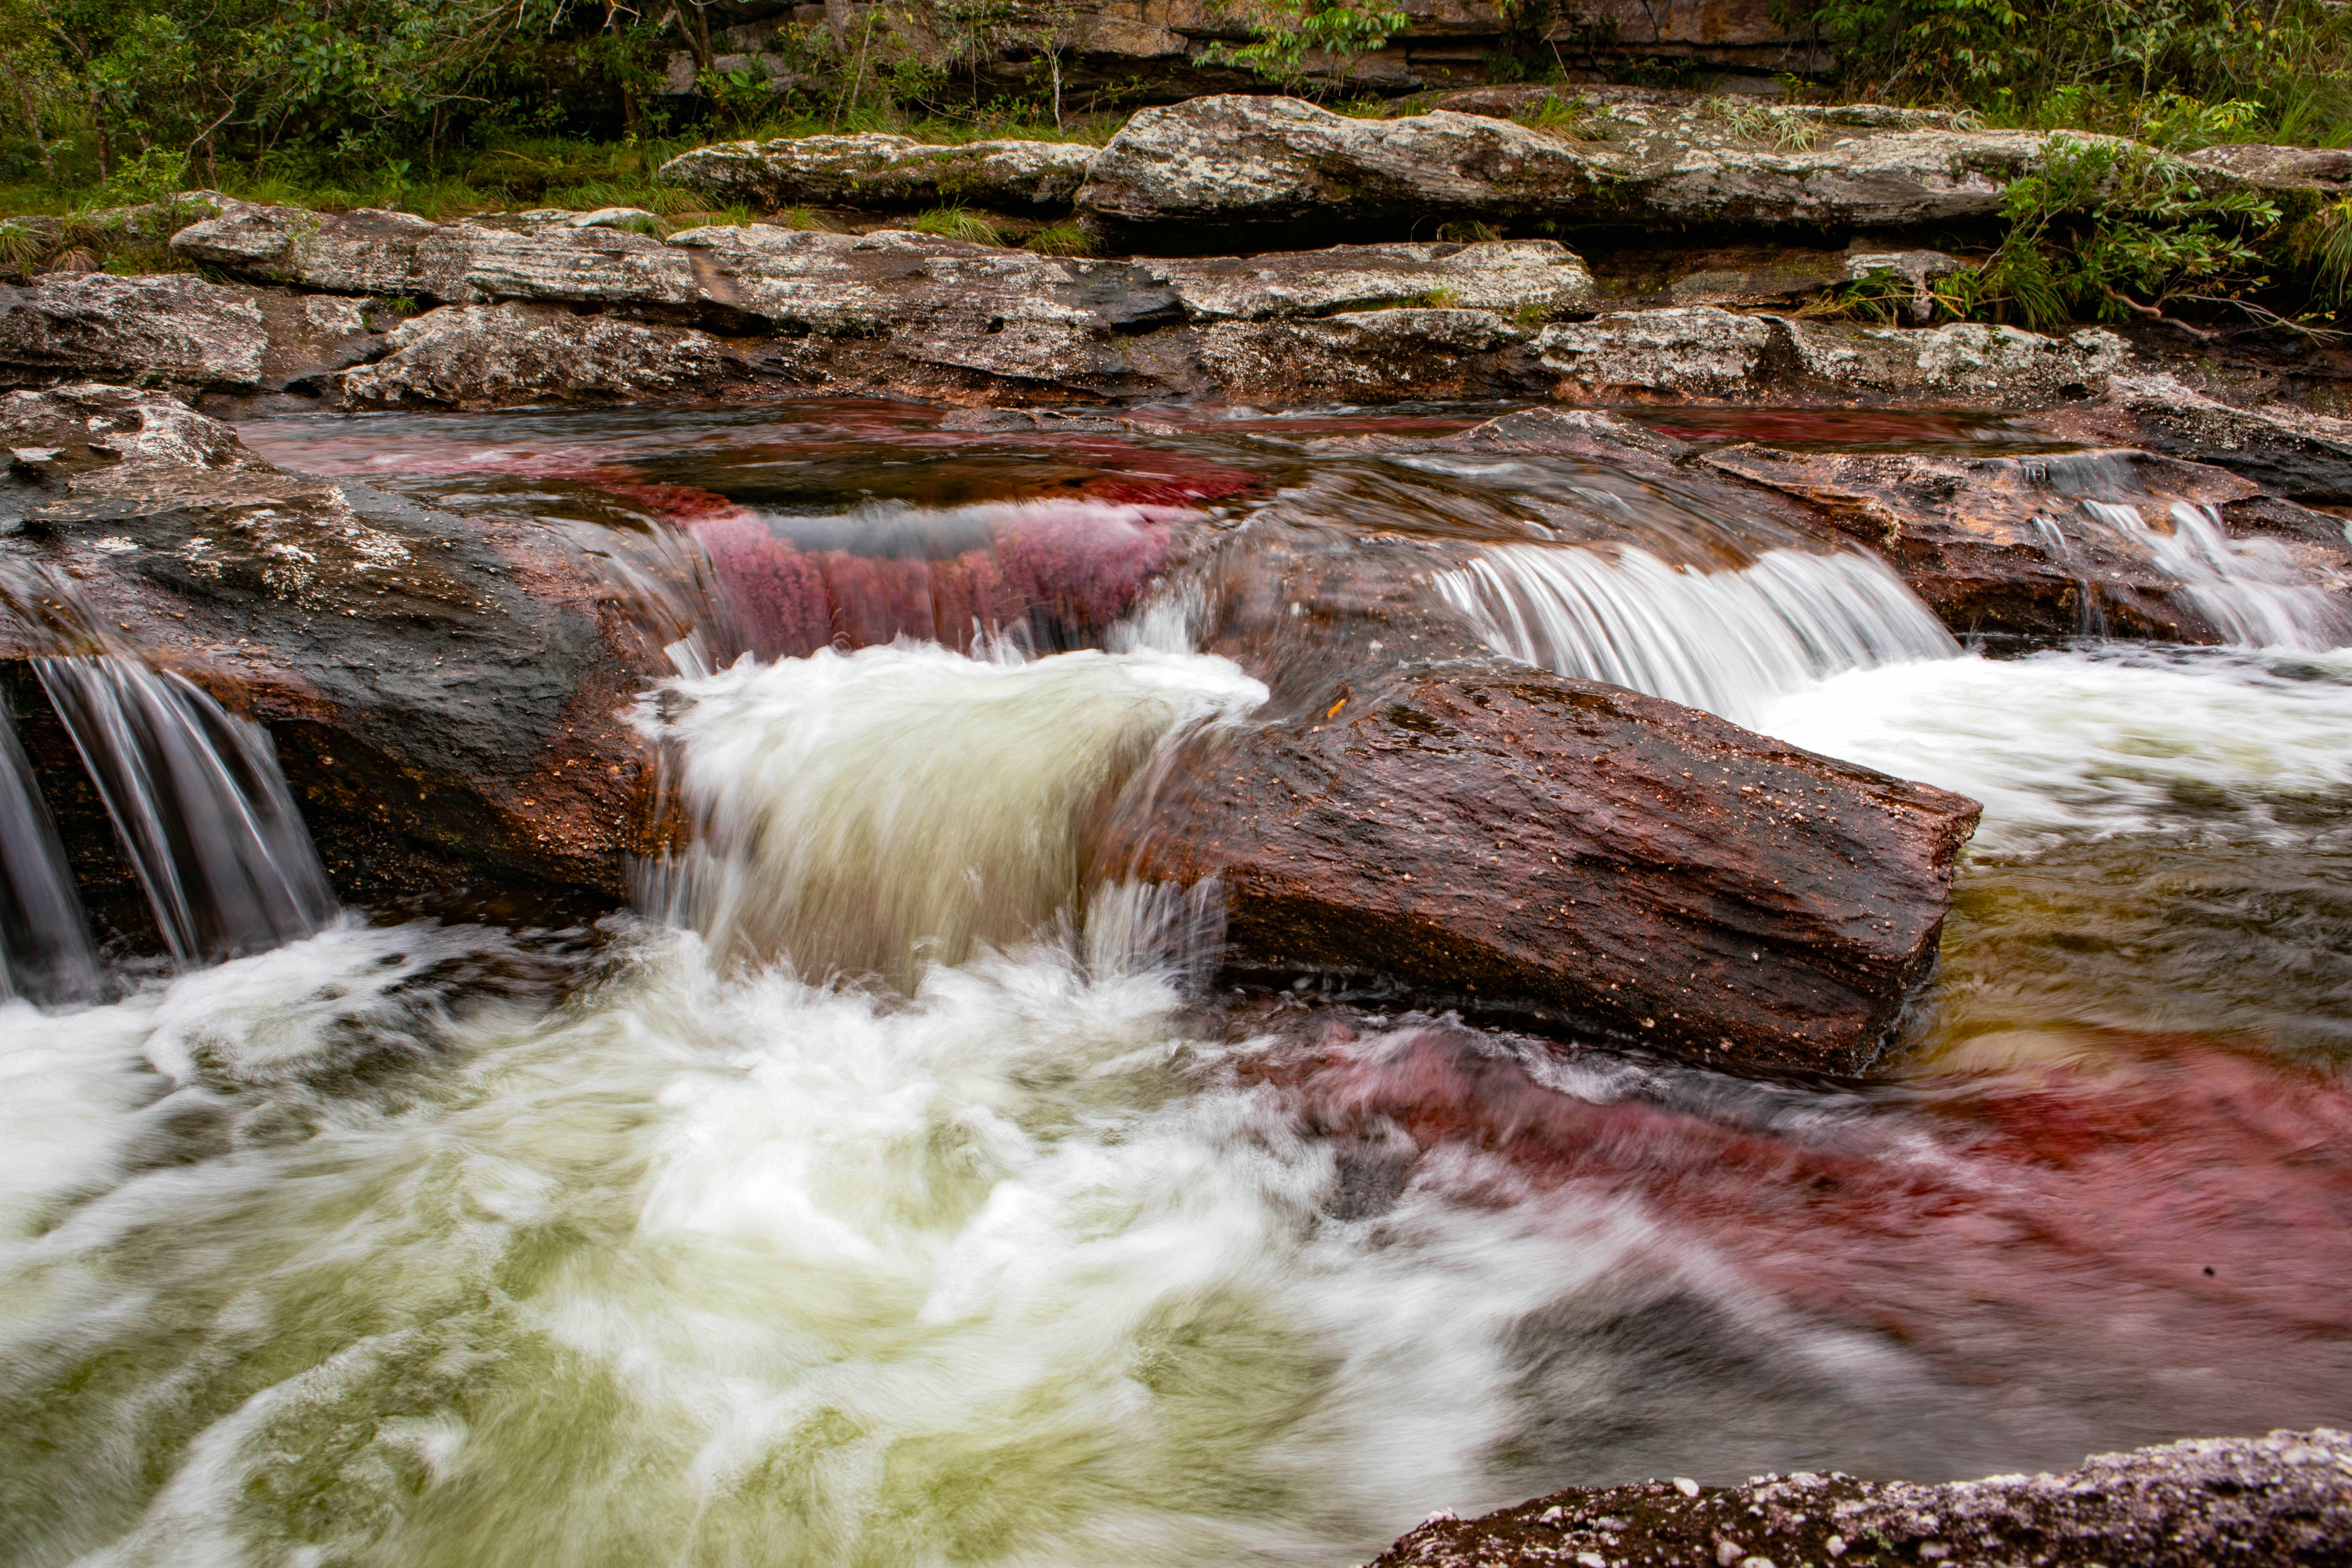 A small waterfall on the Cano Cristales River churns white and red with algae, which also stains the dark rocks flecked with light grey lichen